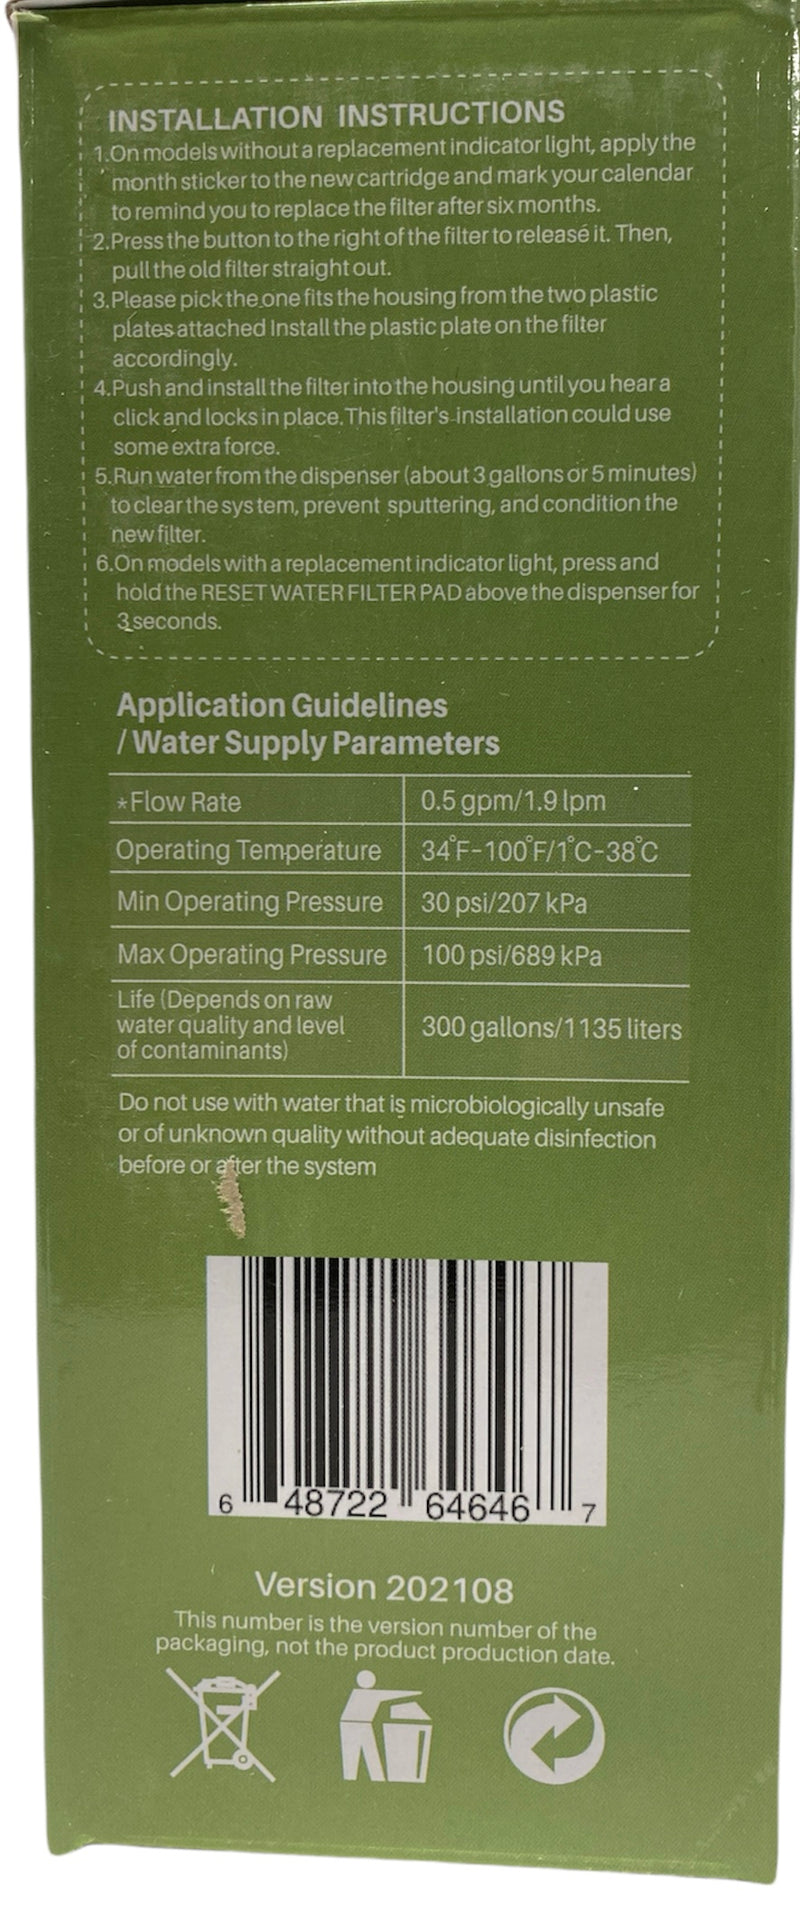 RWF3300A Refrigerator Water Filter IAPMO Certified Replacement for WF2CB, FC100, 9916, 469916 Refrigerator Water Filter